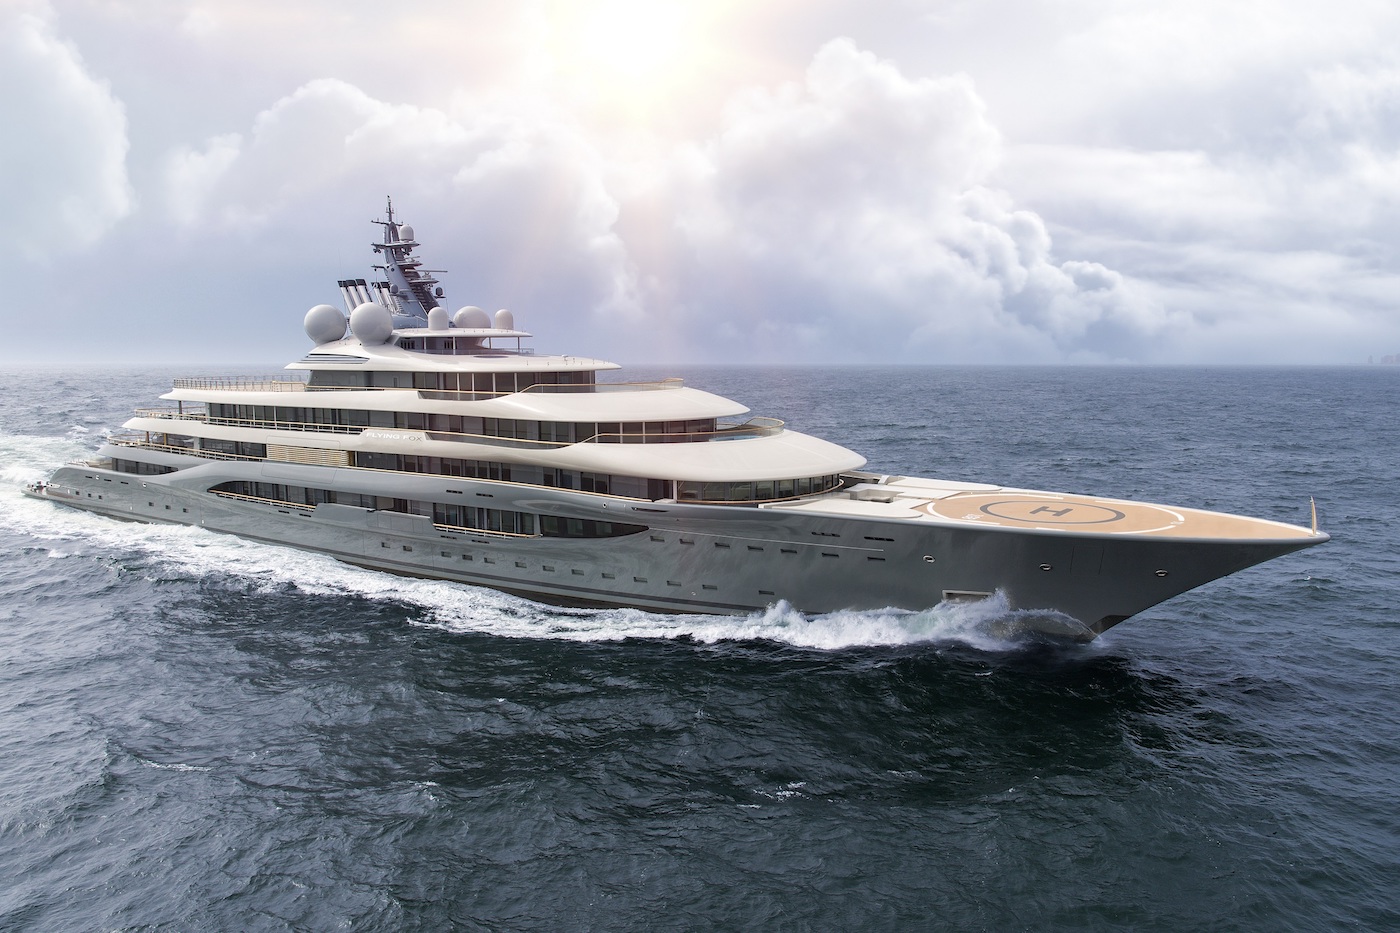 superyacht charter cost